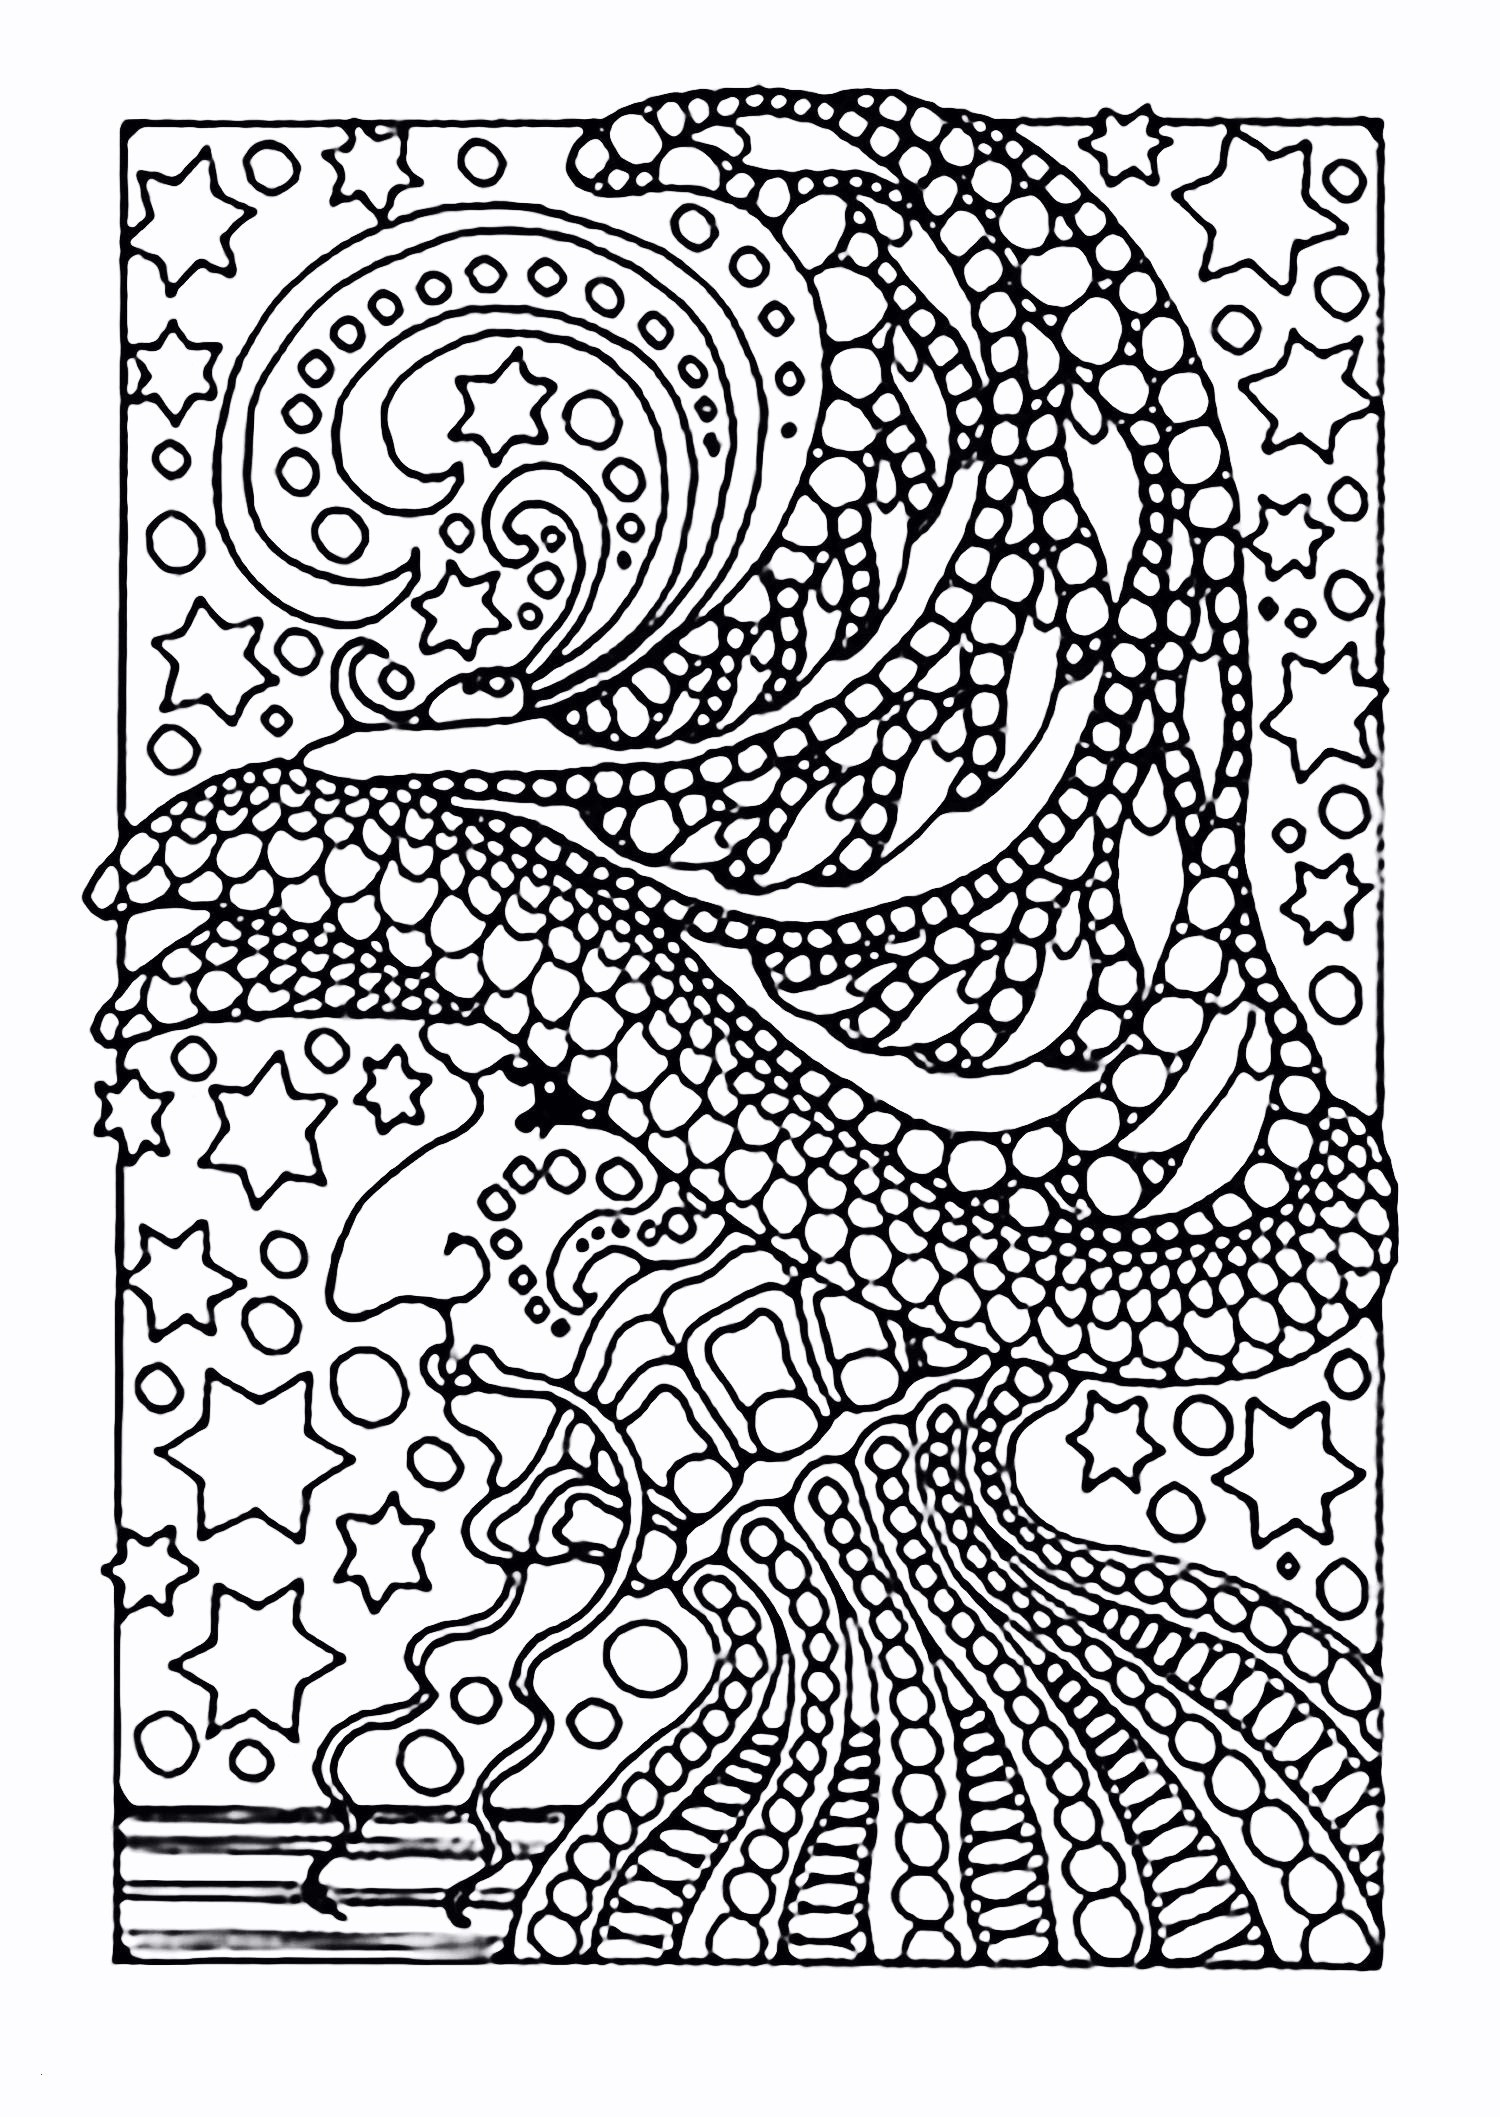 12 Ideal Picasso Vase Painting 2024 free download picasso vase painting of pages for painting jagadishshettar com inside free dog coloring pages new cool printable coloring pages fresh cool od dog coloring pages free